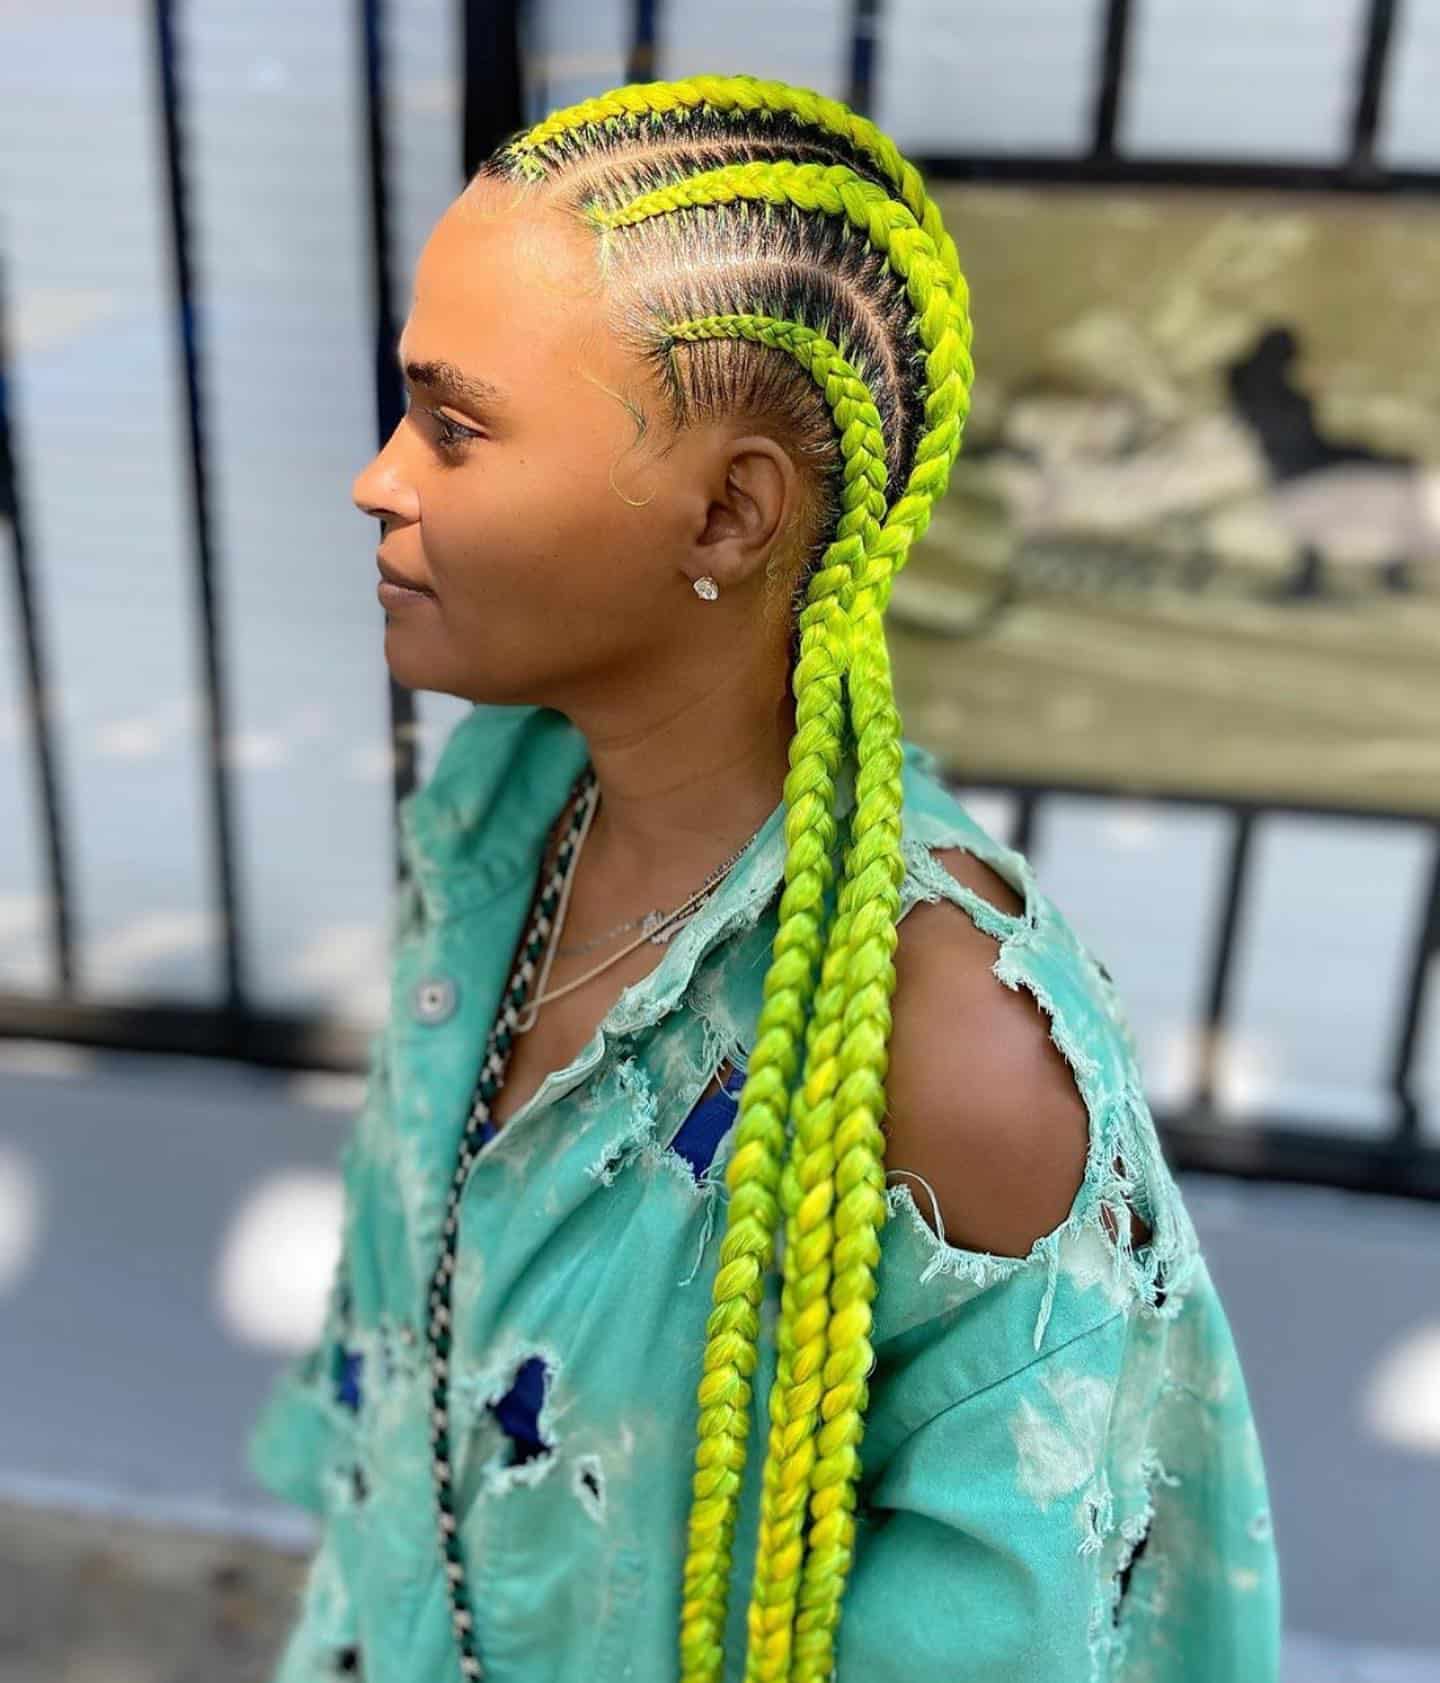 Image of Green Cornrows in the style of green braids